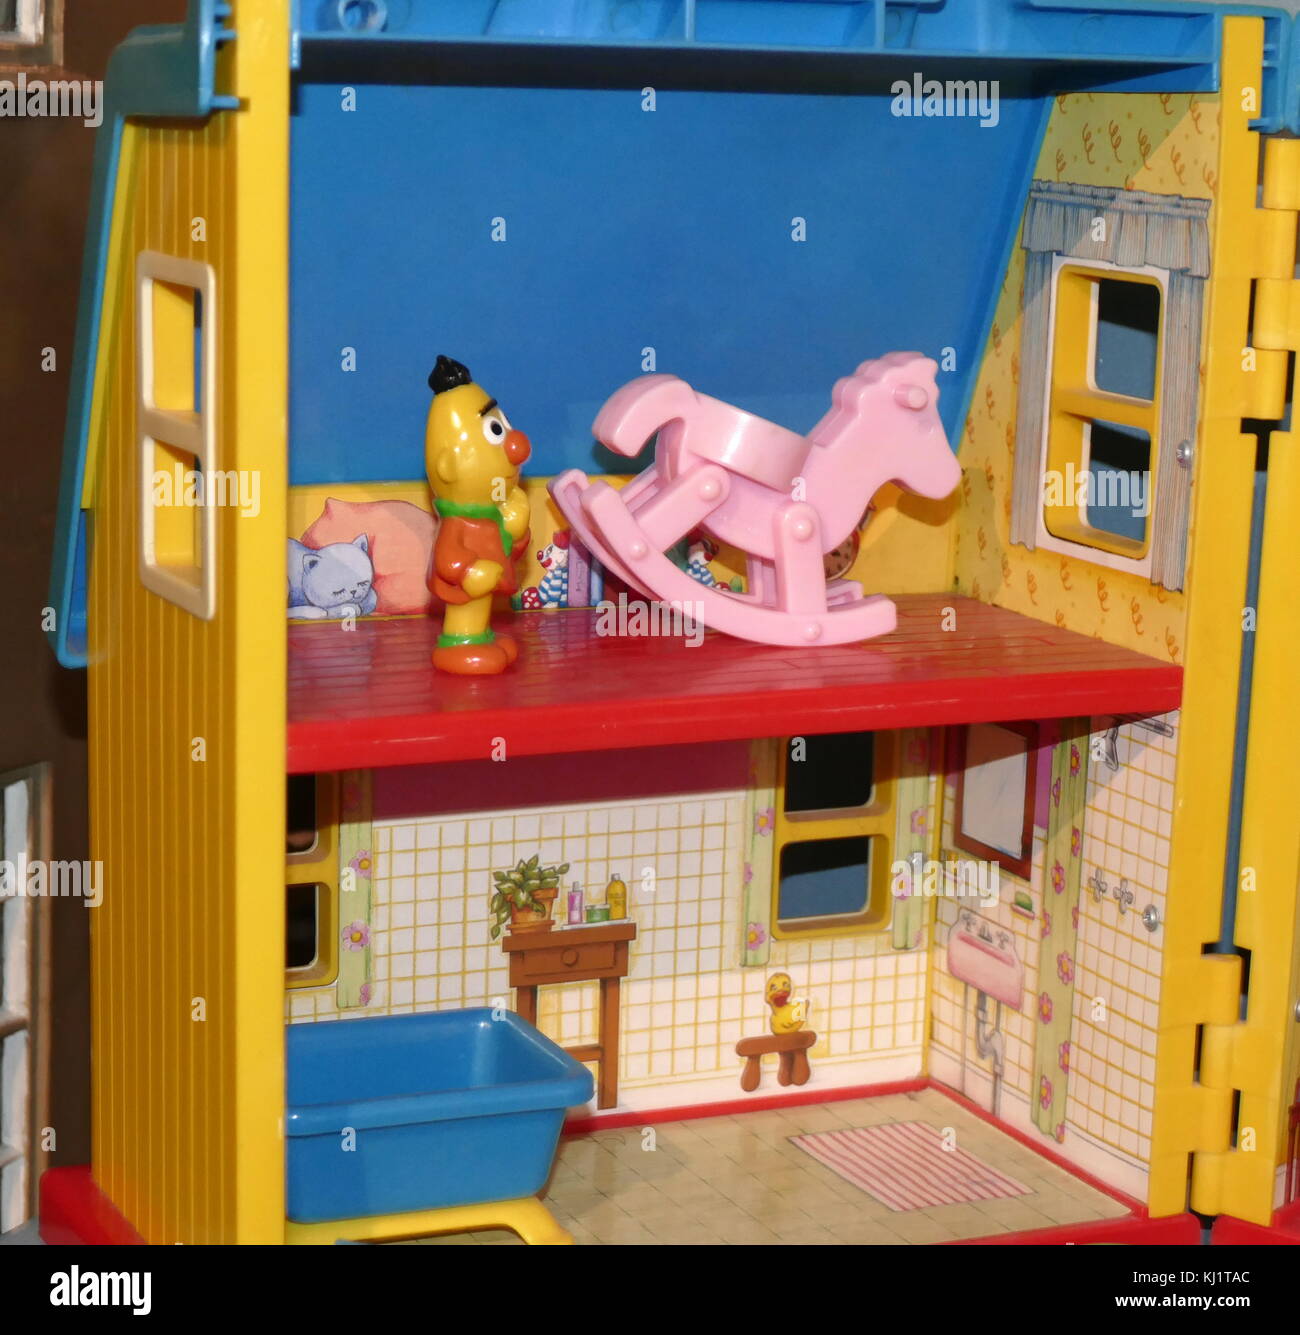 Sesame Street Dolls house made based on the popular children's television programme of the 1980's-1990's. Stock Photo